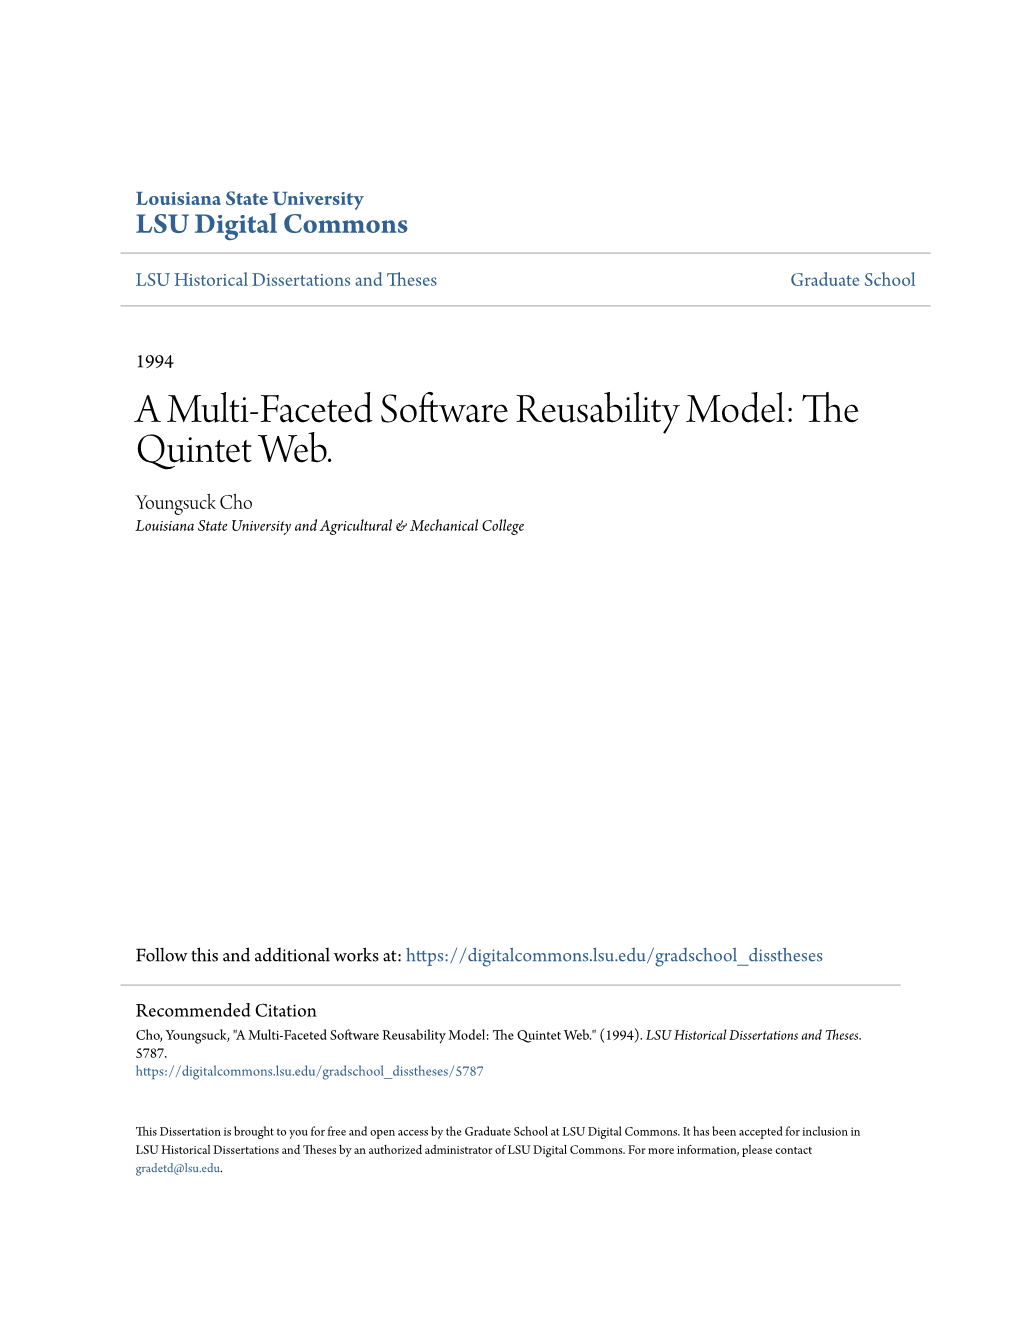 A Multi-Faceted Software Reusability Model: the Quintet Web